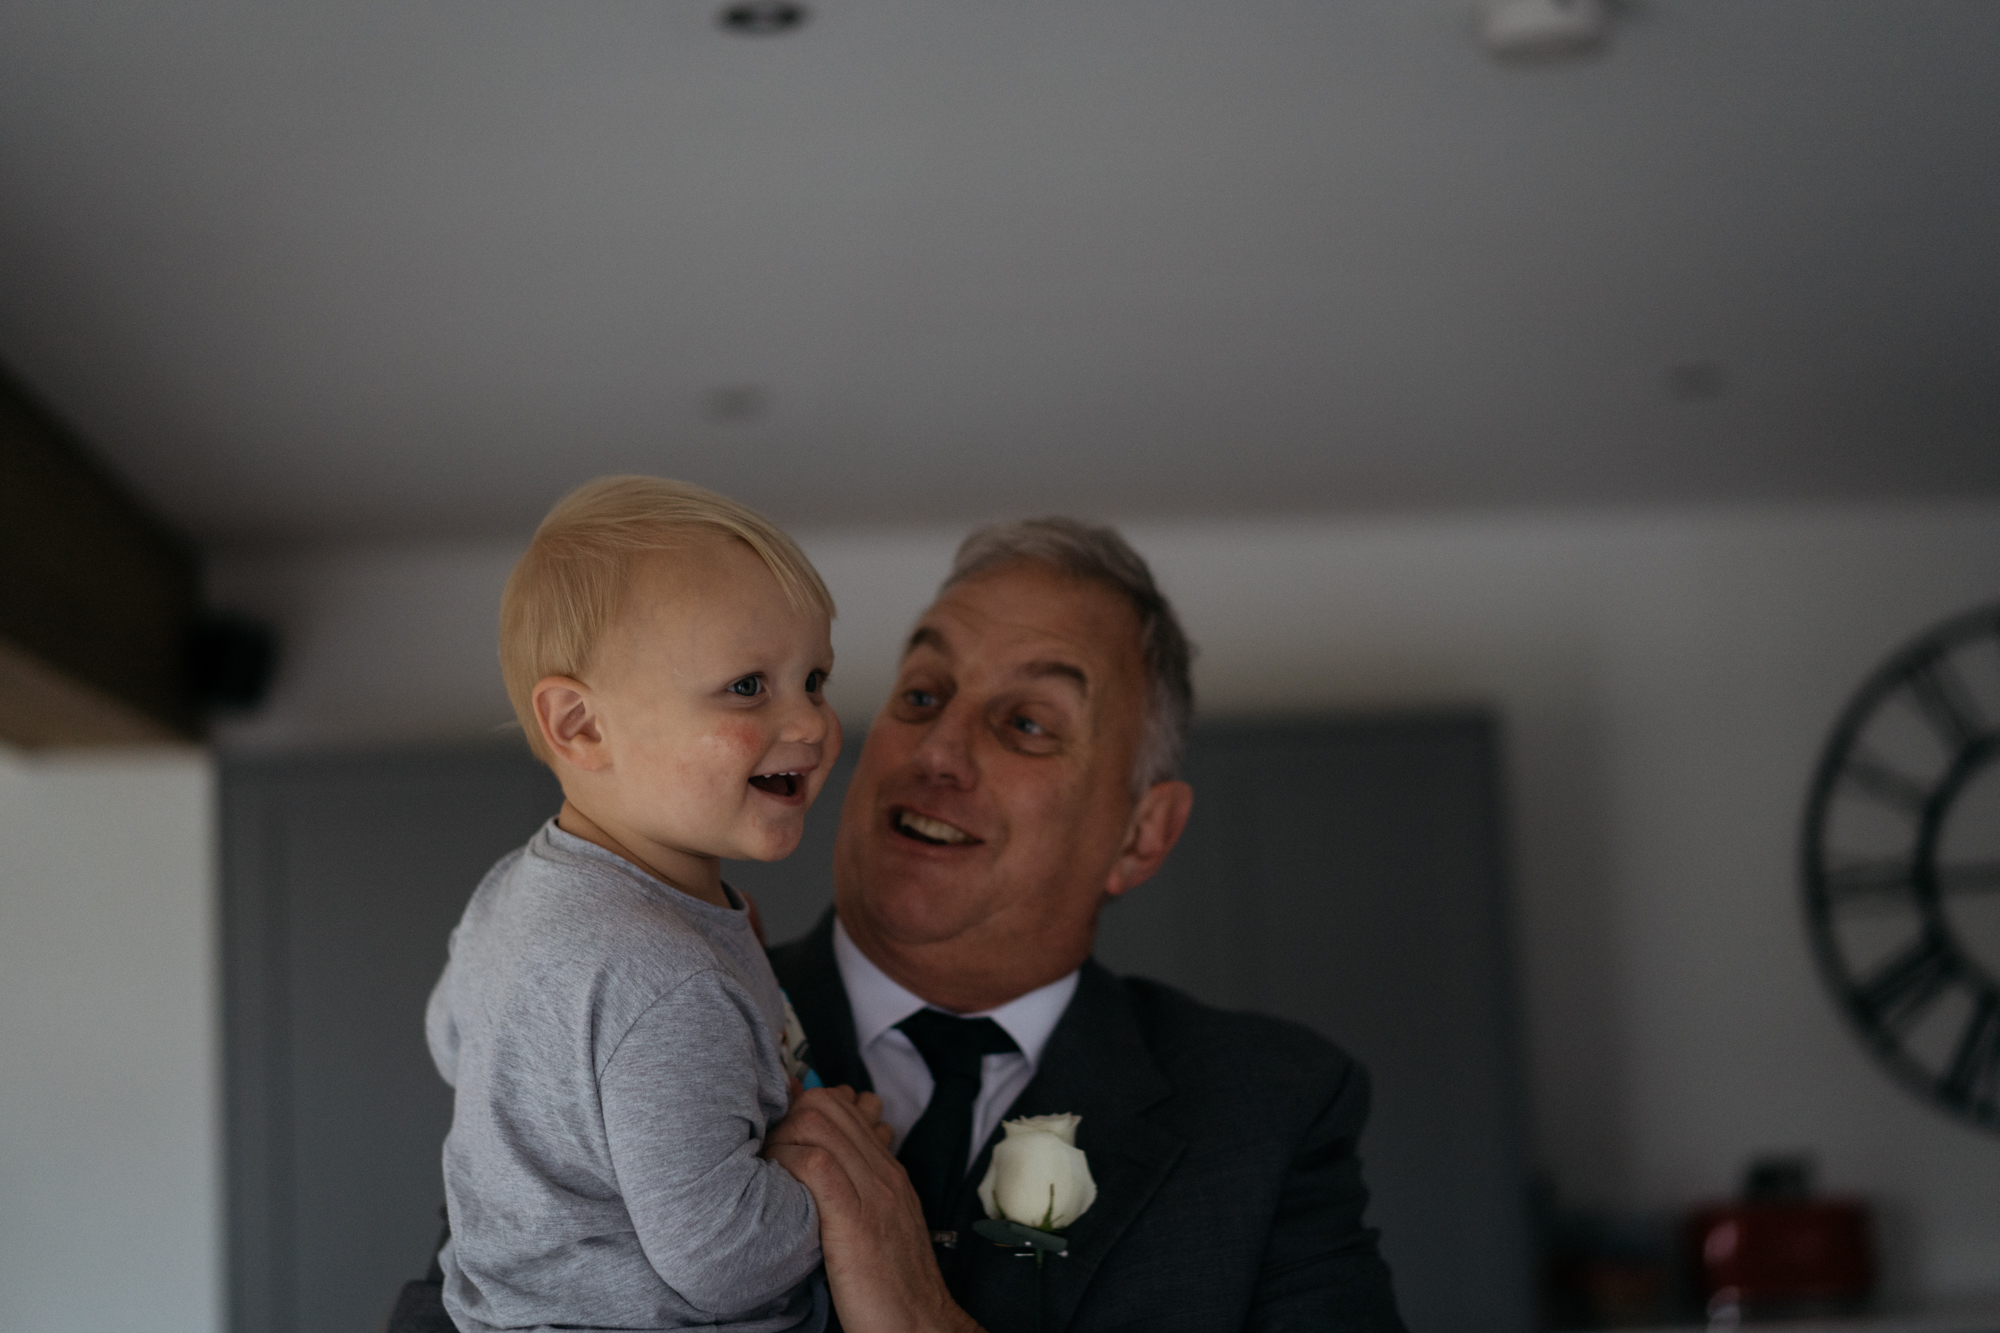 A little boy happy to be with his grandfather